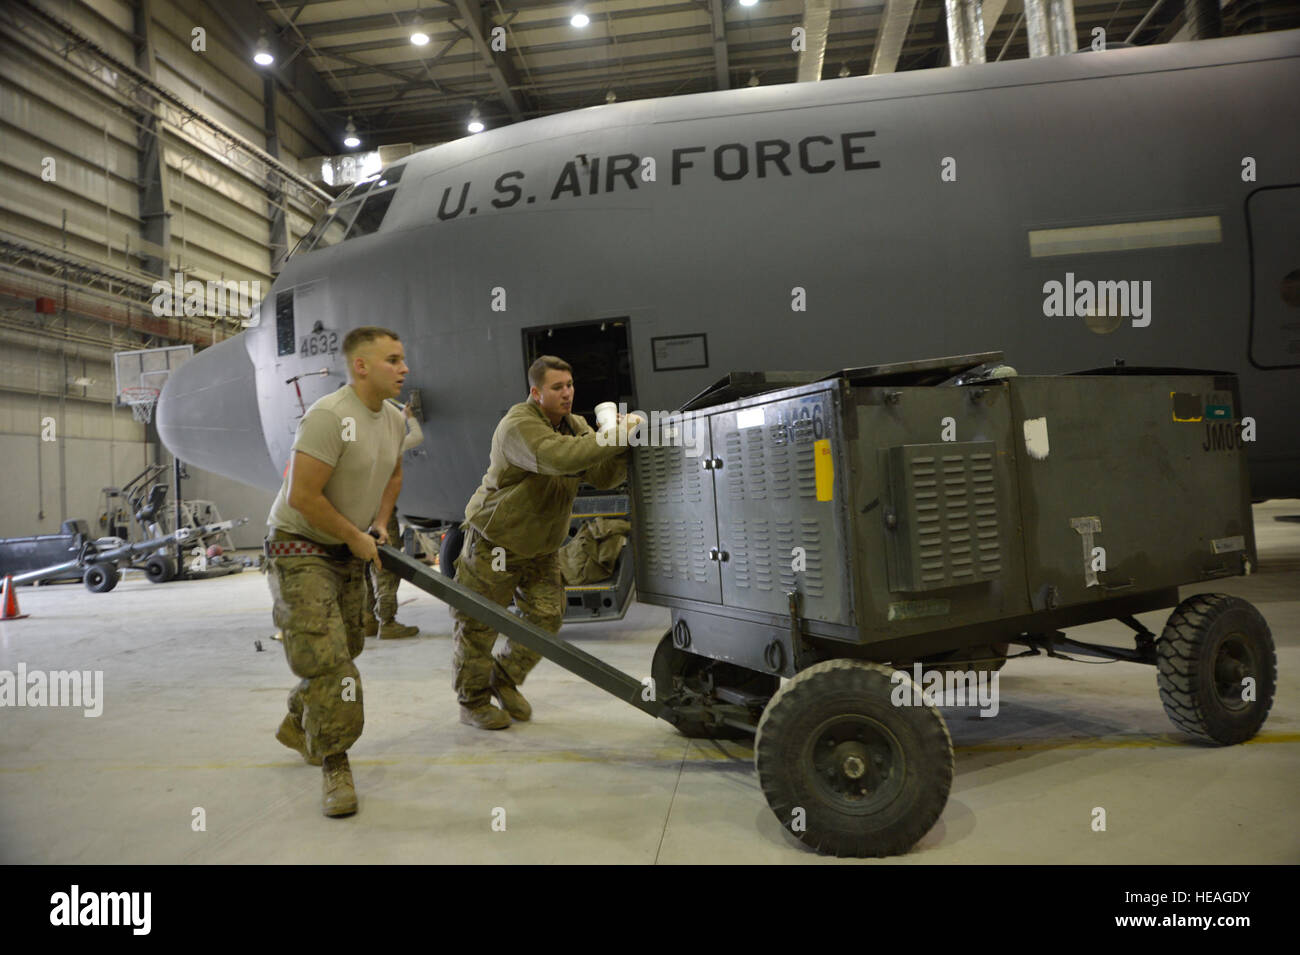 U.S. Air Force Senior Airman Charles Livesoy and Staff Sgt. Ian Farley move a generator that will be used in conjunction with jacks to raise a C-130J Super Hercules Nov. 3, 2014. Livesoy and Farley are crew chiefs assigned to the 19th Aircraft Maintenance Squadron at Little Rock Air Force Base, Ark. They are responsible for ensuring C-130J aircraft are mission ready to provide airlift and cargo movements throughout Afghanistan. Livesoy is a native of St. Louis, Mo. and Farely is from Auburn, Calif.  Master Sgt. Cohen A. Young Stock Photo